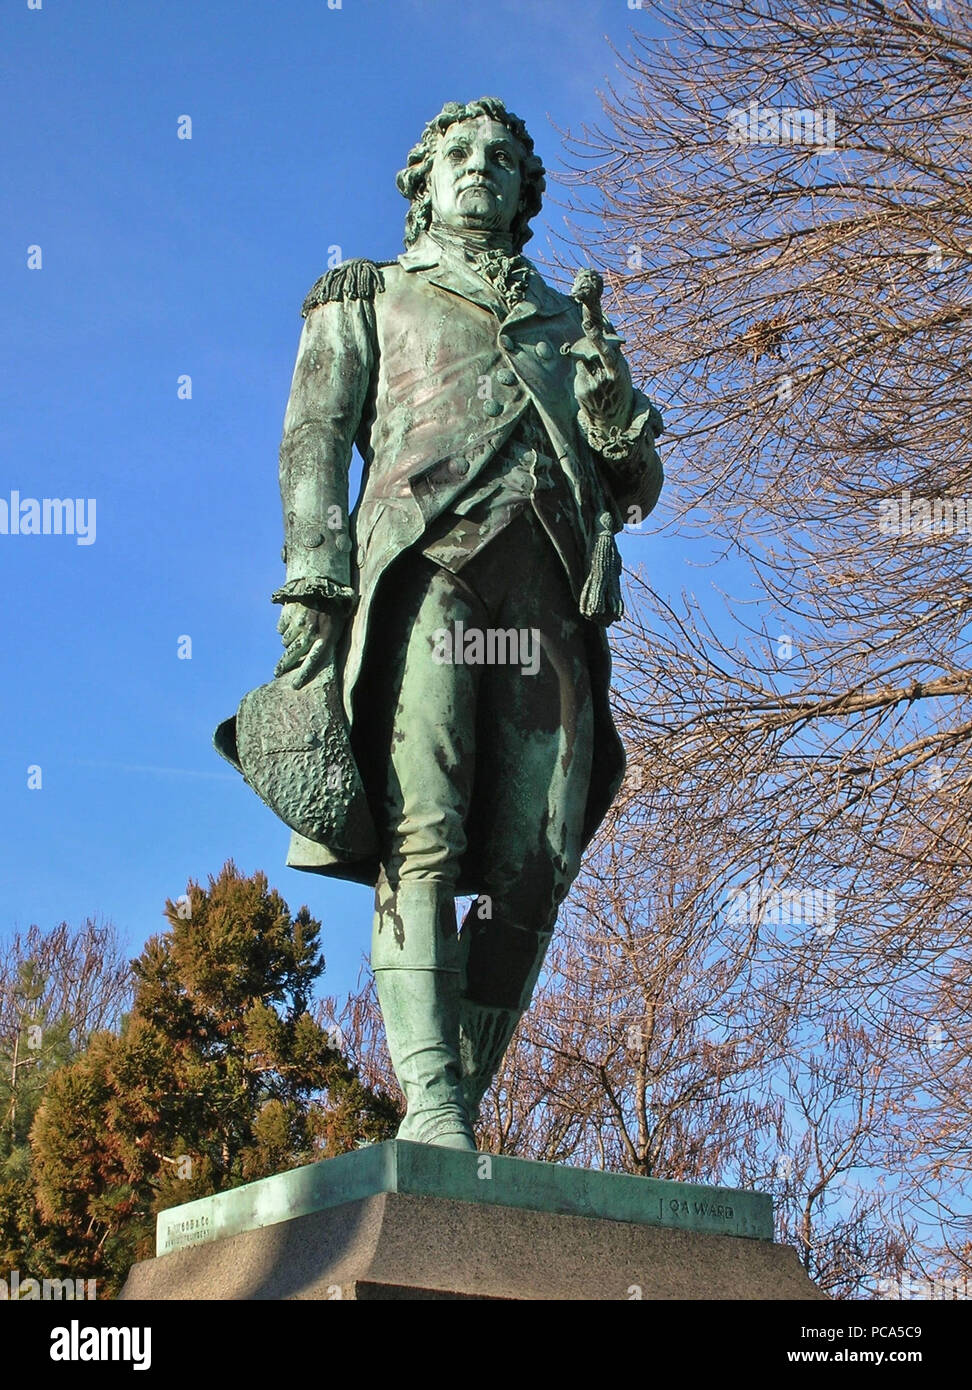 83 Statue of Israel Putnam by John Quincy Adams Ward in Bushnell Park, Hartford, CT - January 2016 Stock Photo